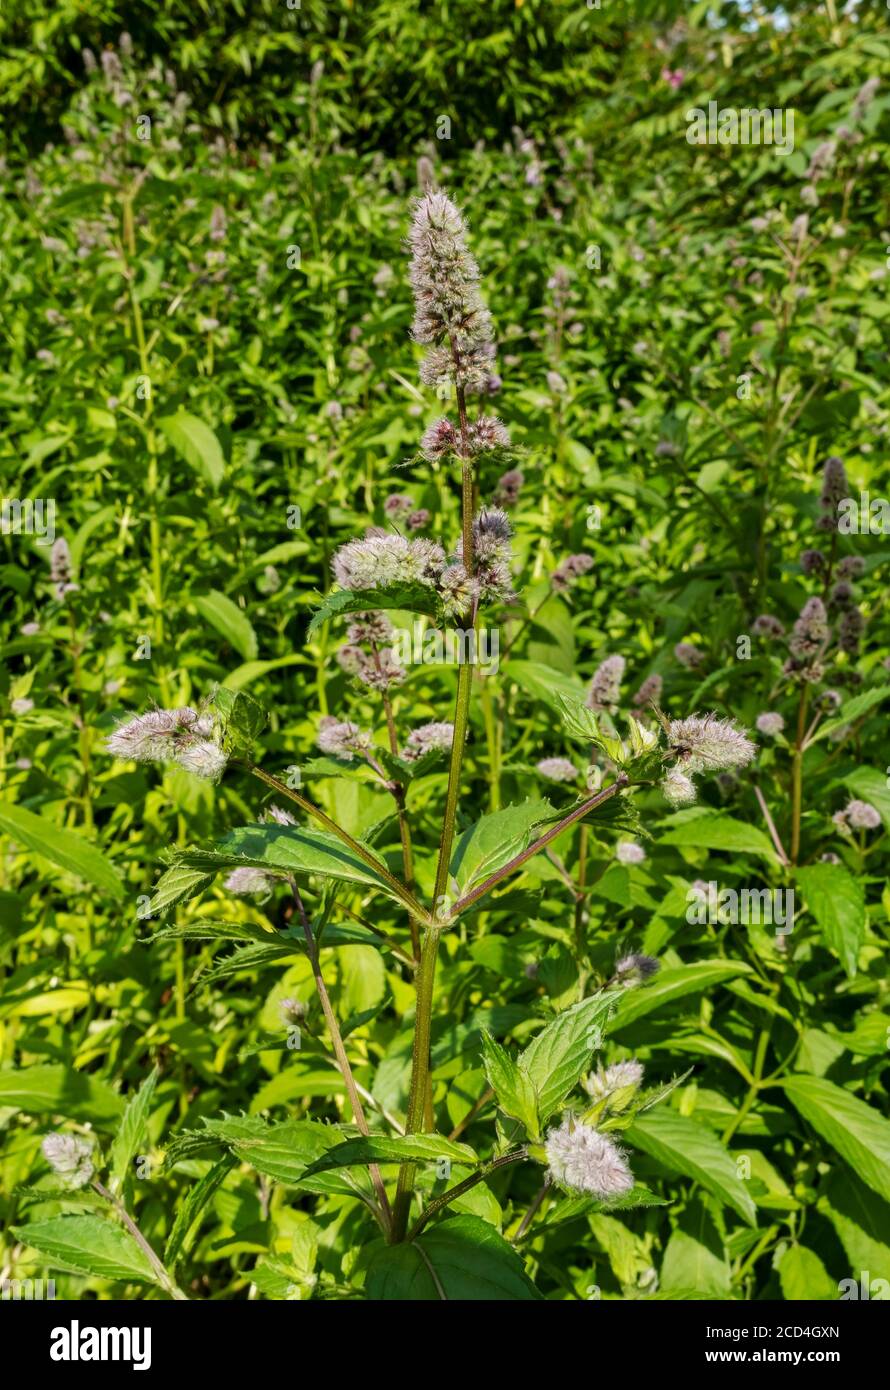 Close up of apple mint (Mentha suaveolens) growing in a herb flower flowers flowering in summer garden England UK United Kingdom GB Great Britain Stock Photo